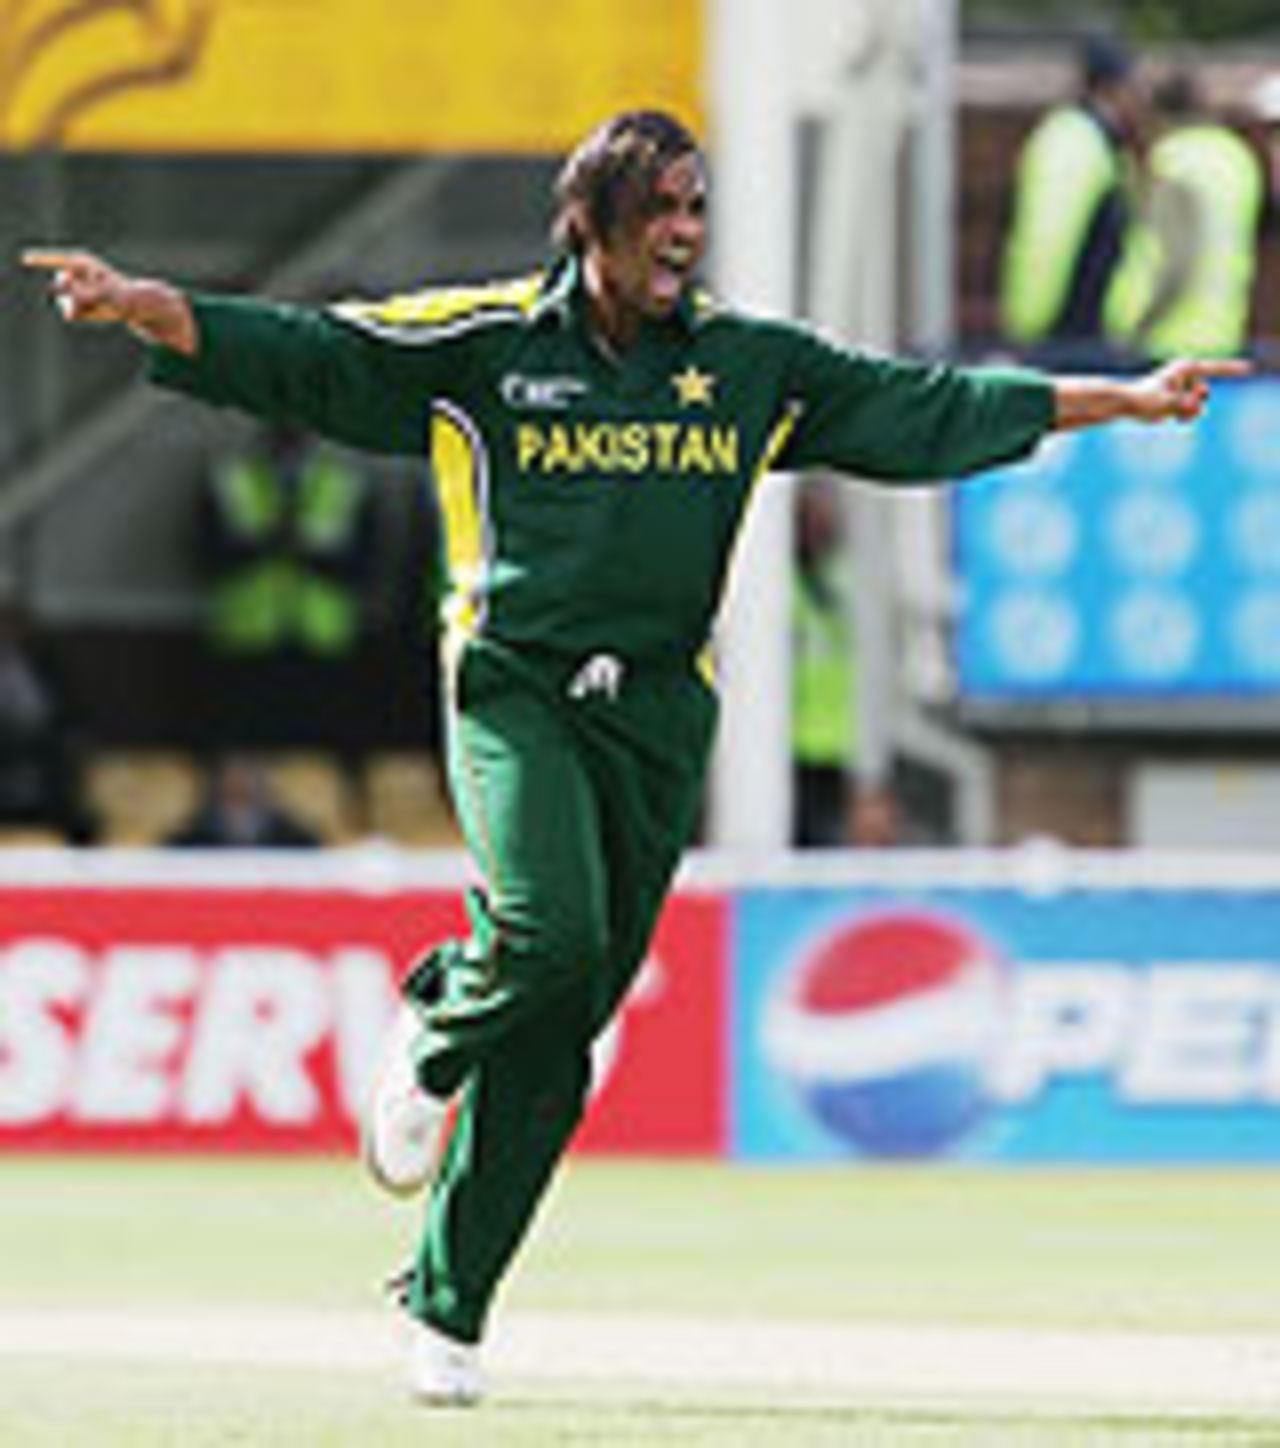 Shoaib Akhtar celebrates another wicket, as Pakistan take control against India at Edgbaston, Champions Trophy, September 19, 2004